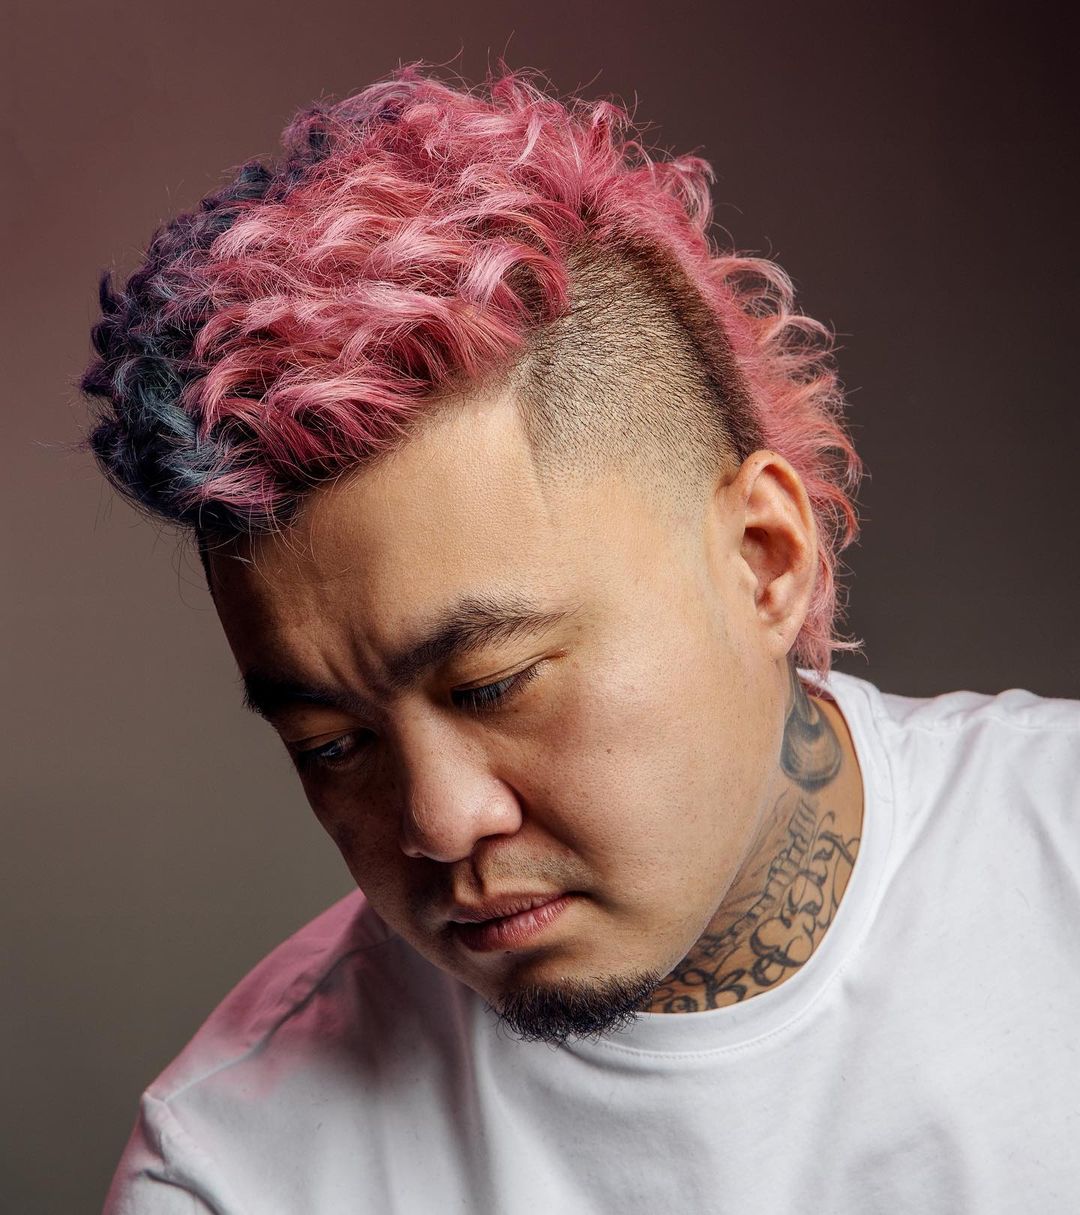 A man with pink hair and a brush in his hair photo – Hair Image on Unsplash